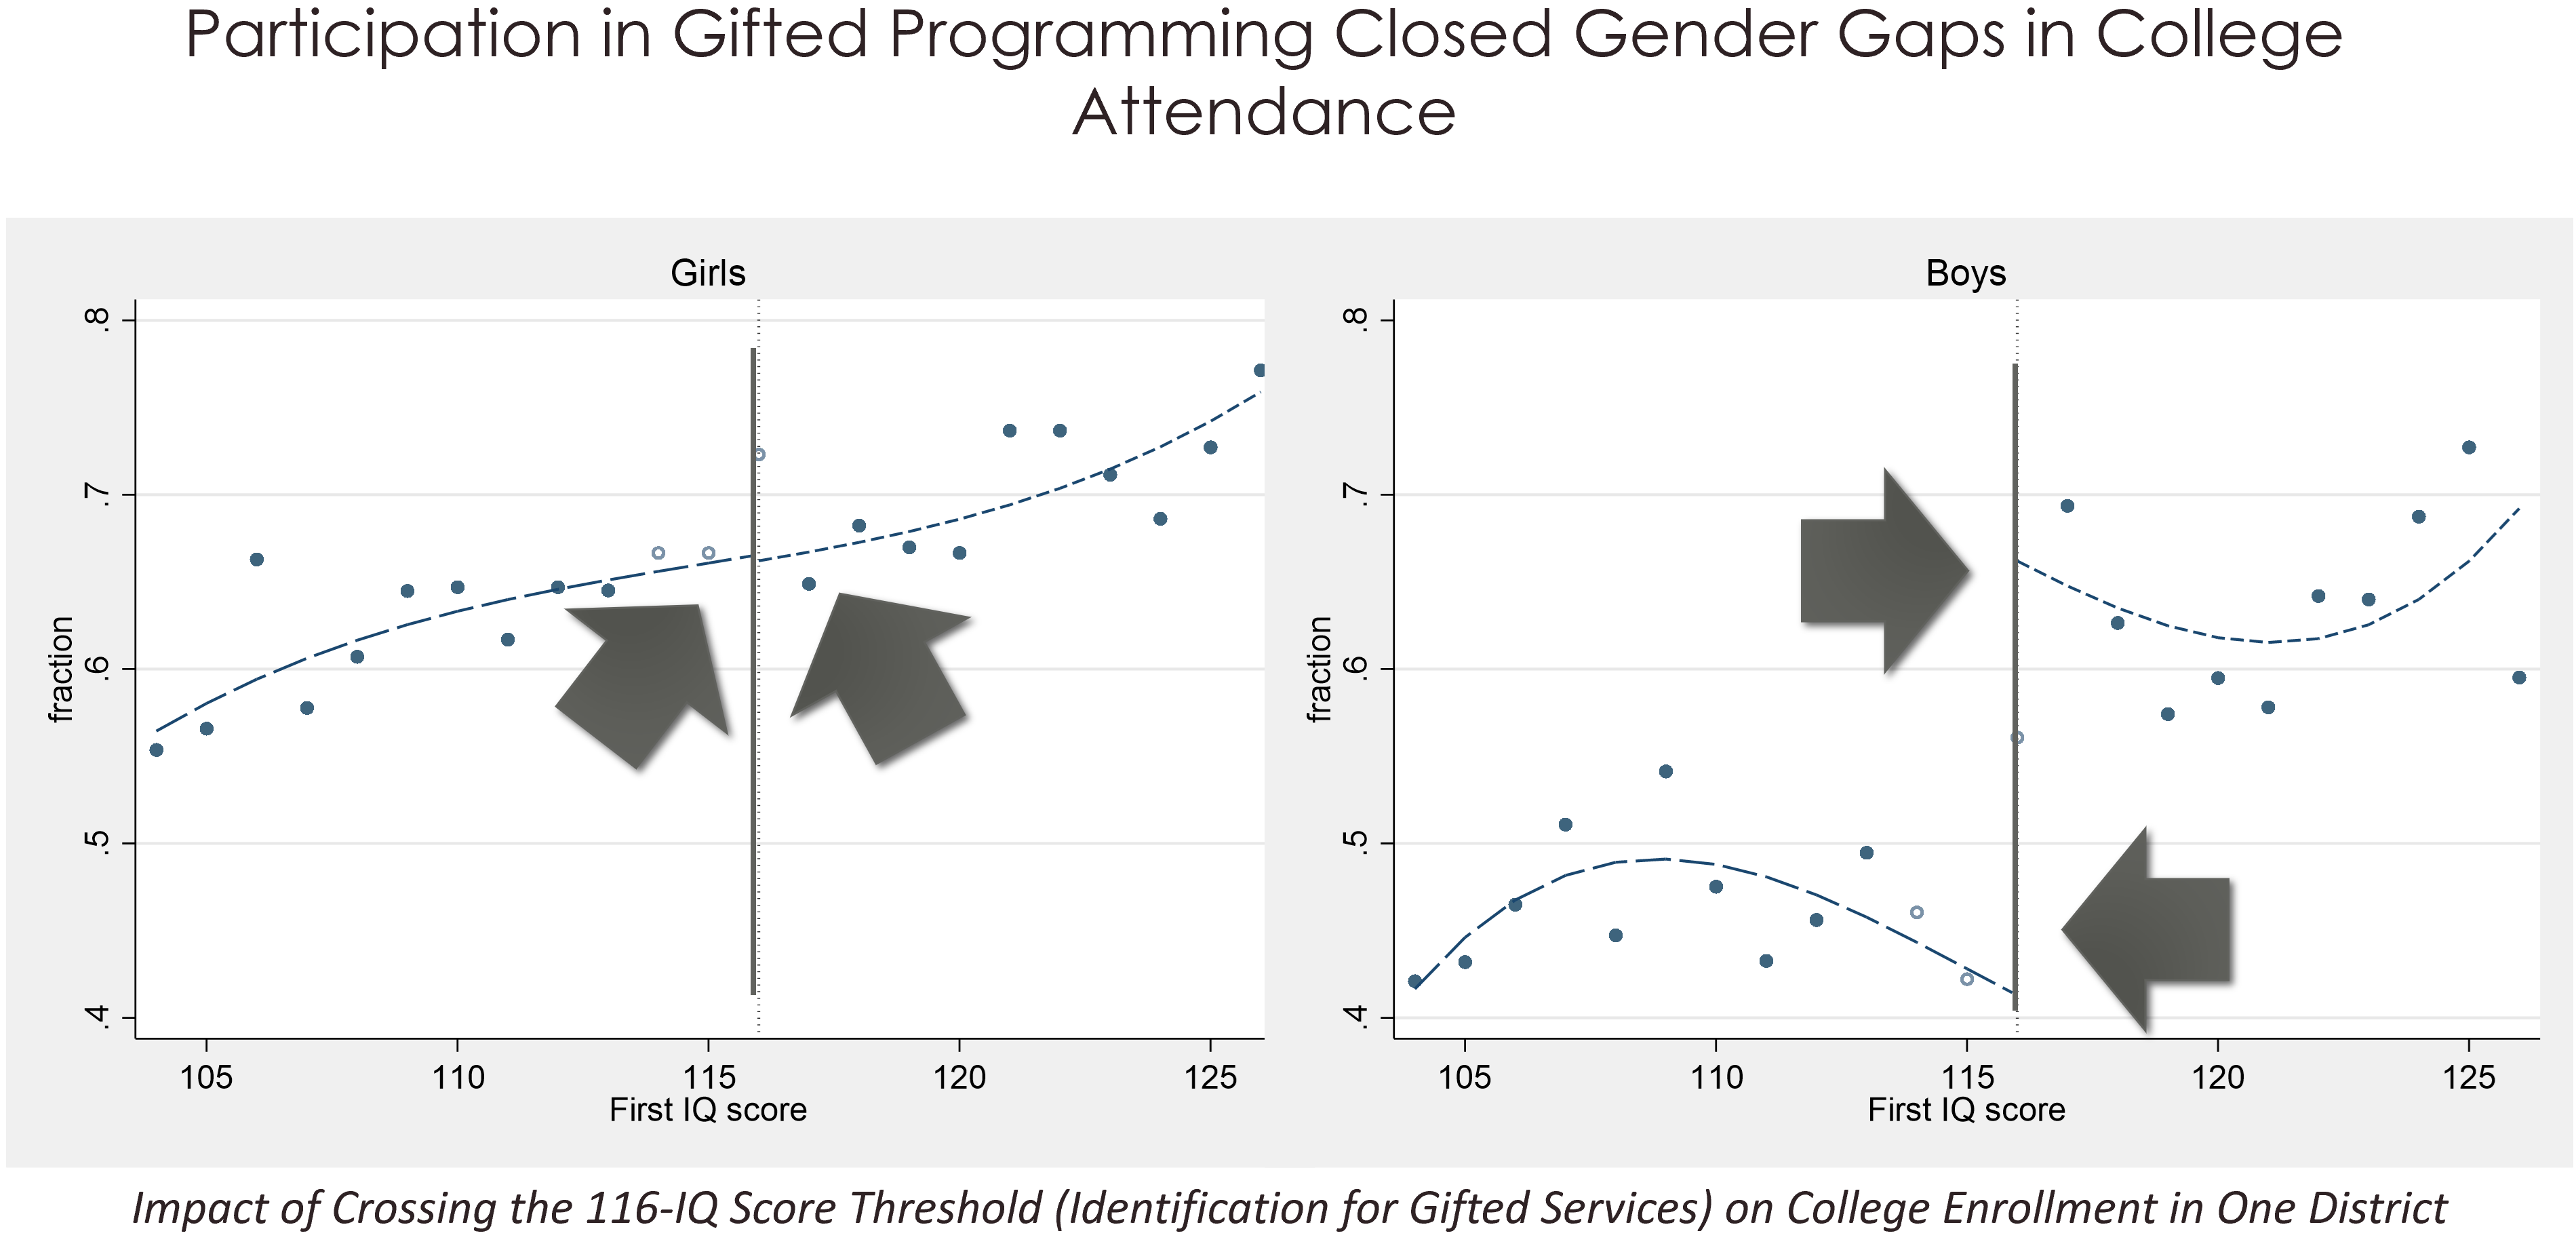 Regression discontinuity graph showing effects of gifted programming on underserved boys' college attendance.